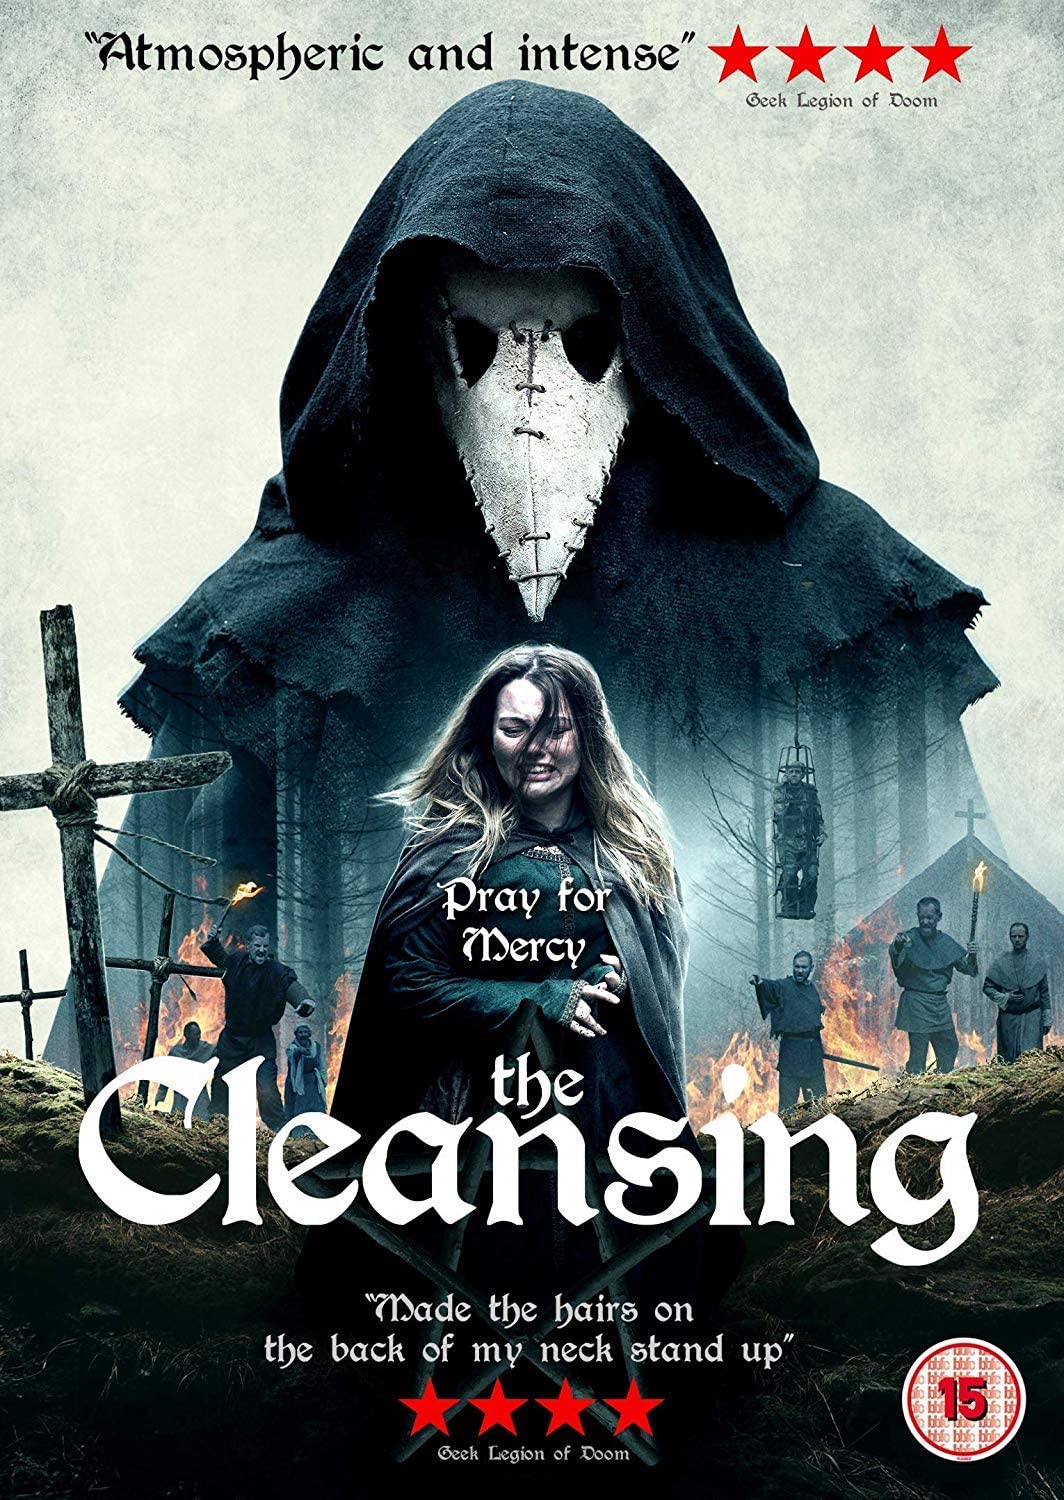 The Cleansing - Horror [DVD]